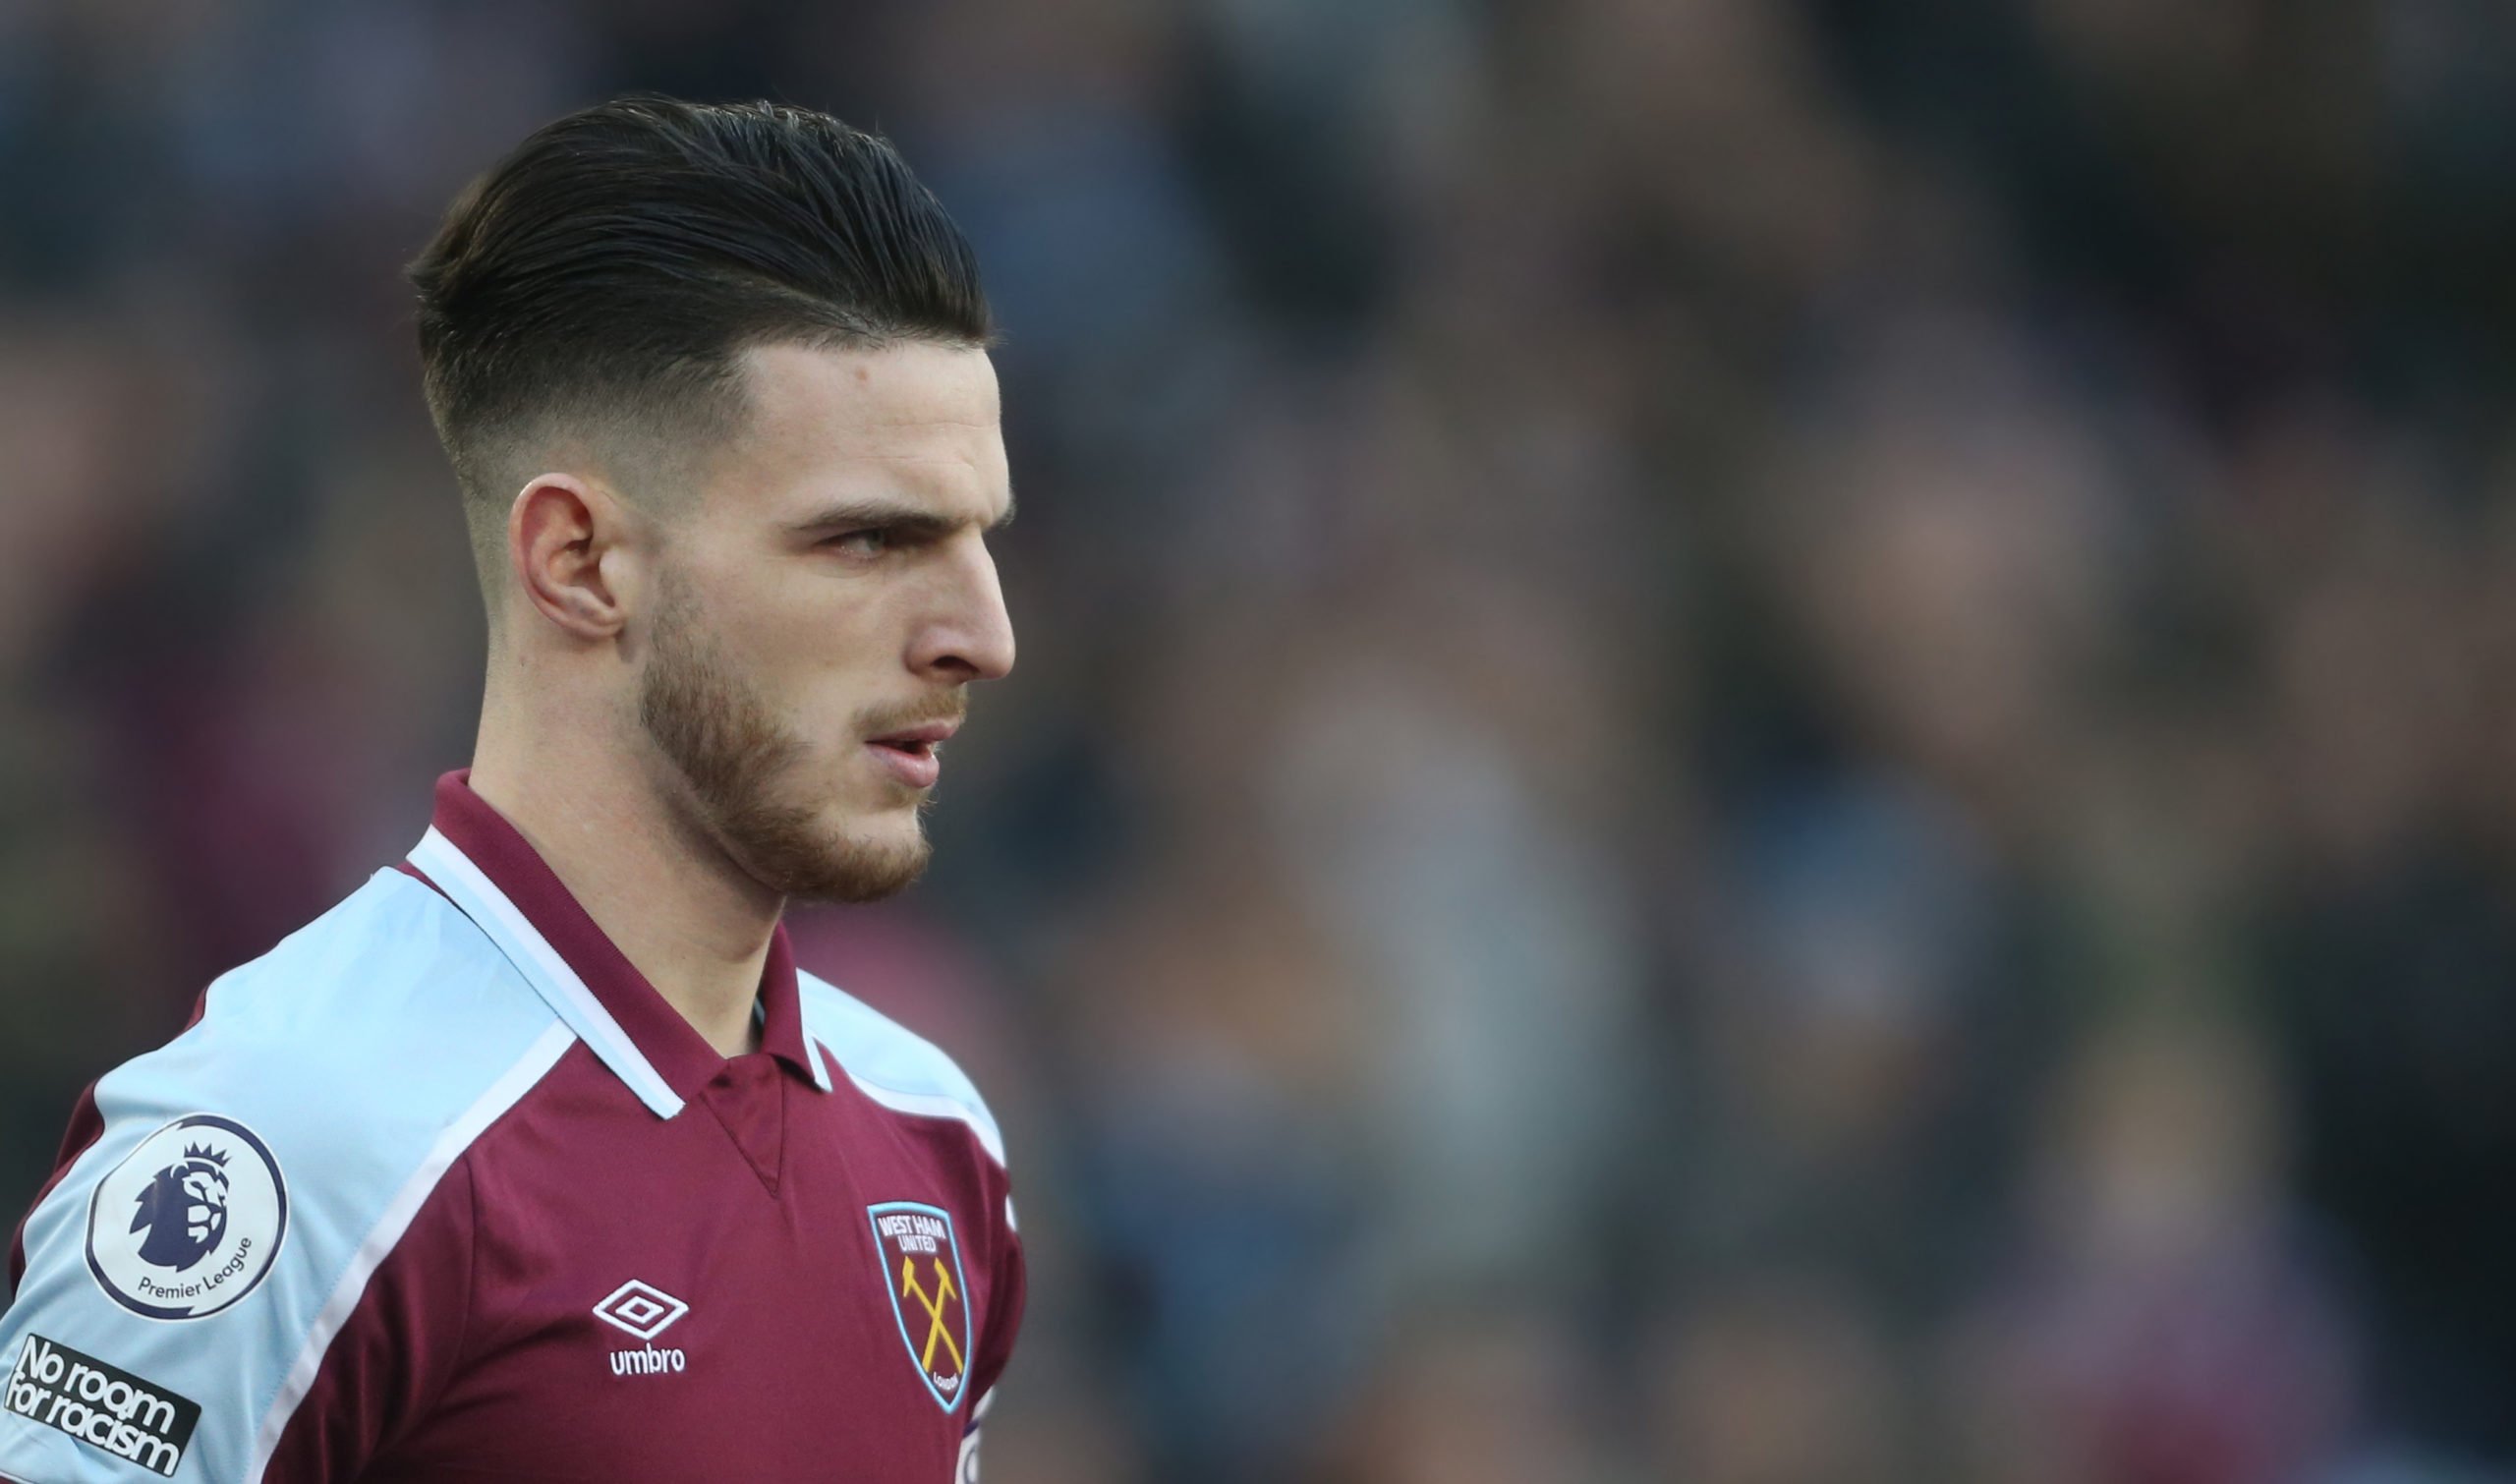 West Ham's Declan Rice says he is inspired by two Liverpool heroes and scared of Spurs star